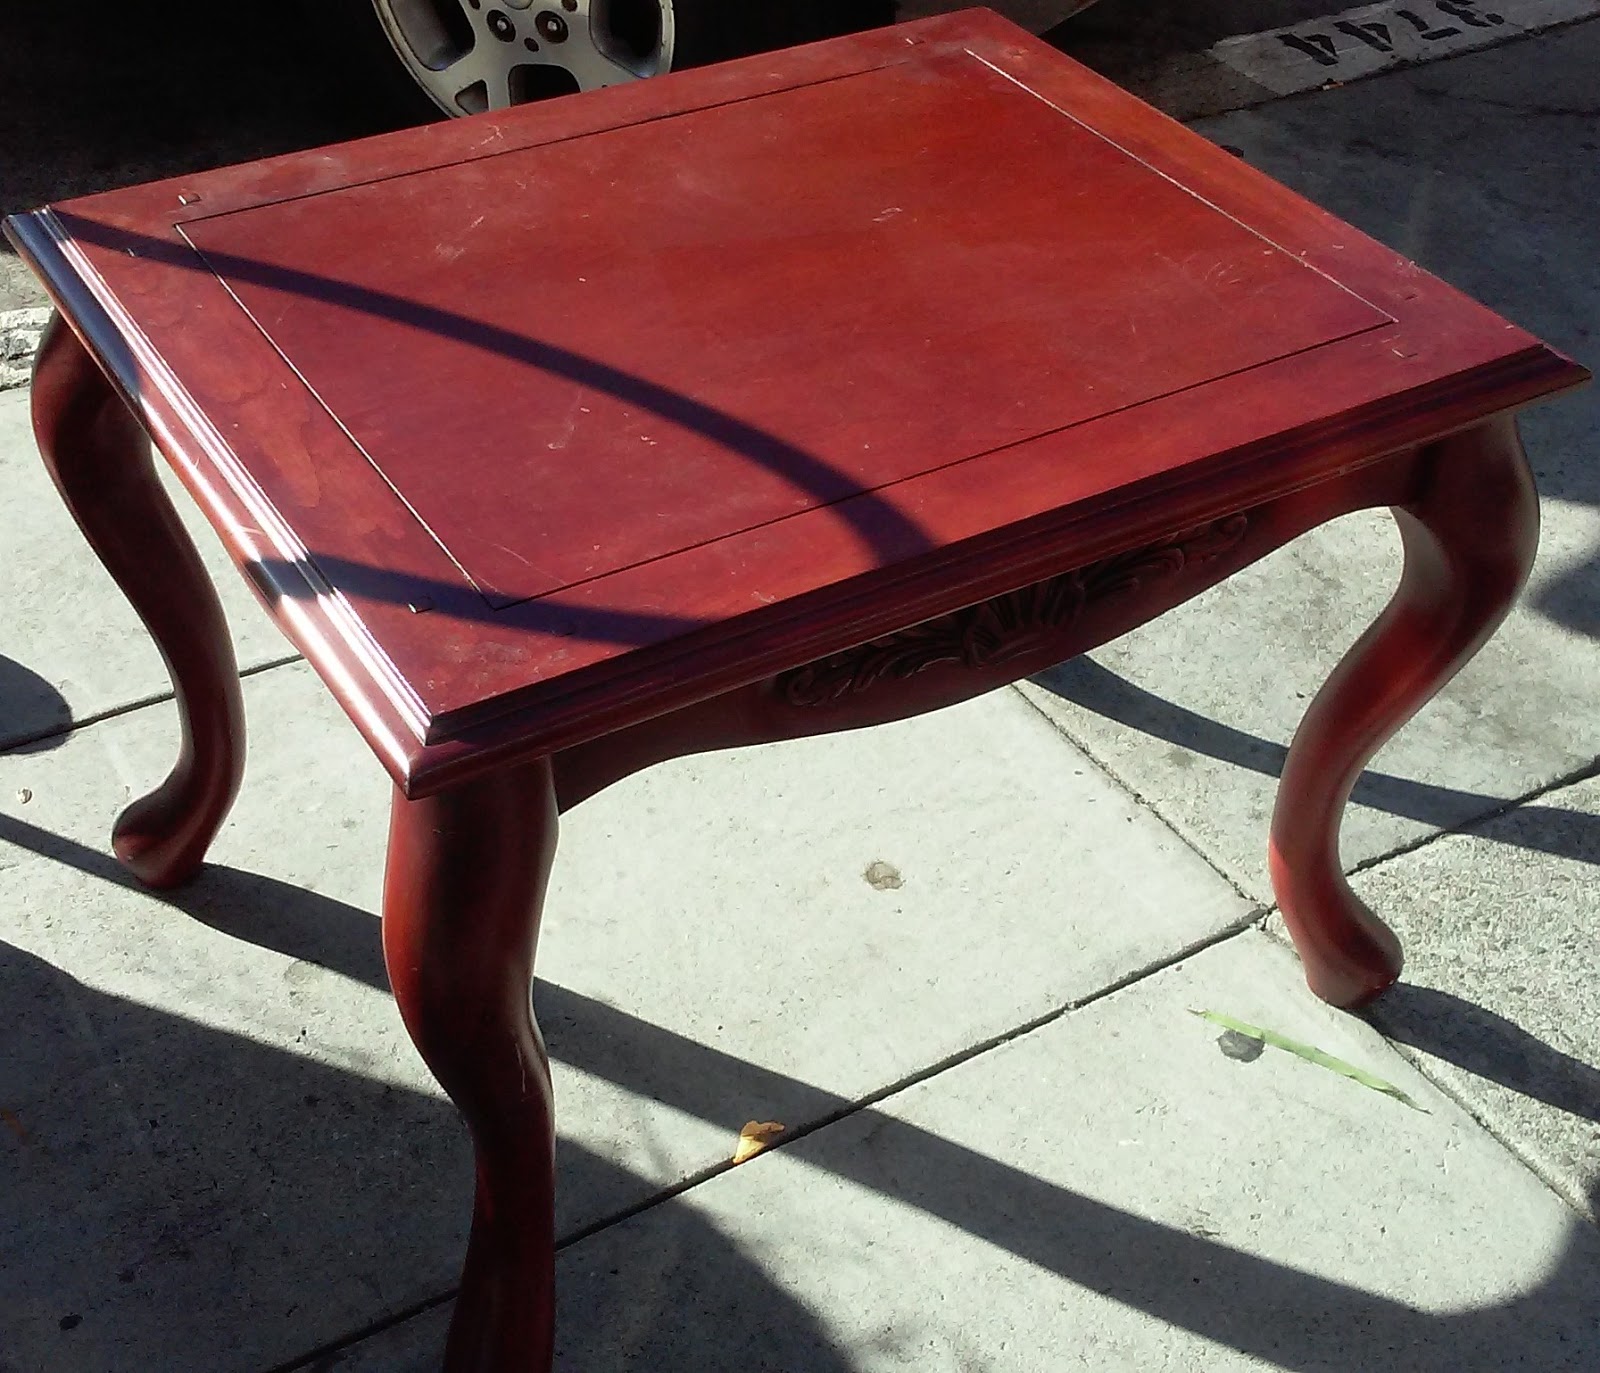 UHURU FURNITURE & COLLECTIBLES: SOLD **REDUCED** Cabriole-Leg End Table